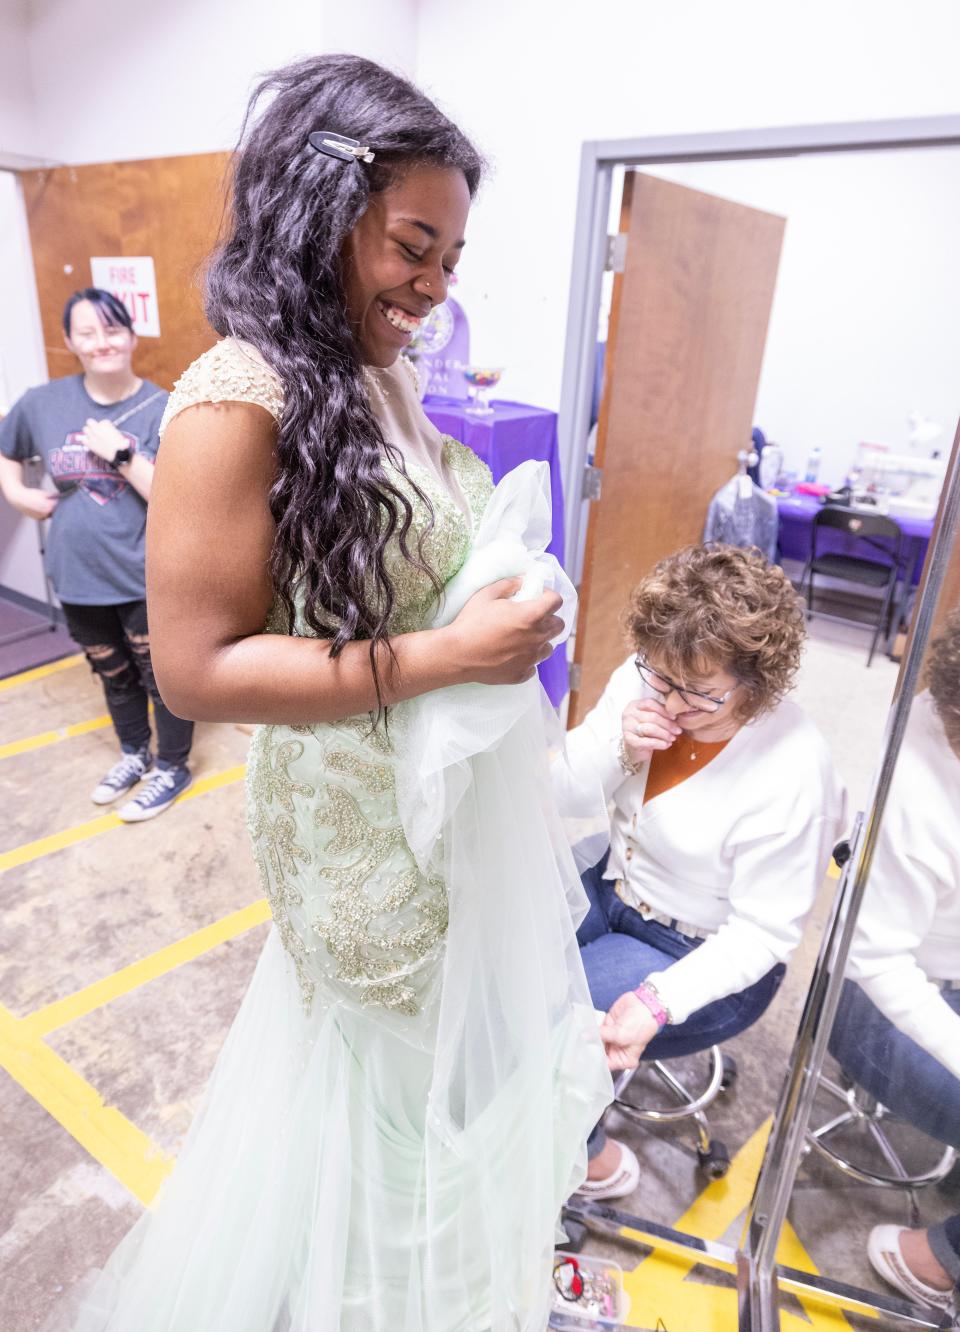 Washington High School senior Jaila Parker has her dress taken in by volunteer Amelia Ciccone at the Bear Hugs prom pop-up shop. It's the third year the group has opened its boutique to offer prom attendees a chance to pick out a free dress, shoes and accessories.